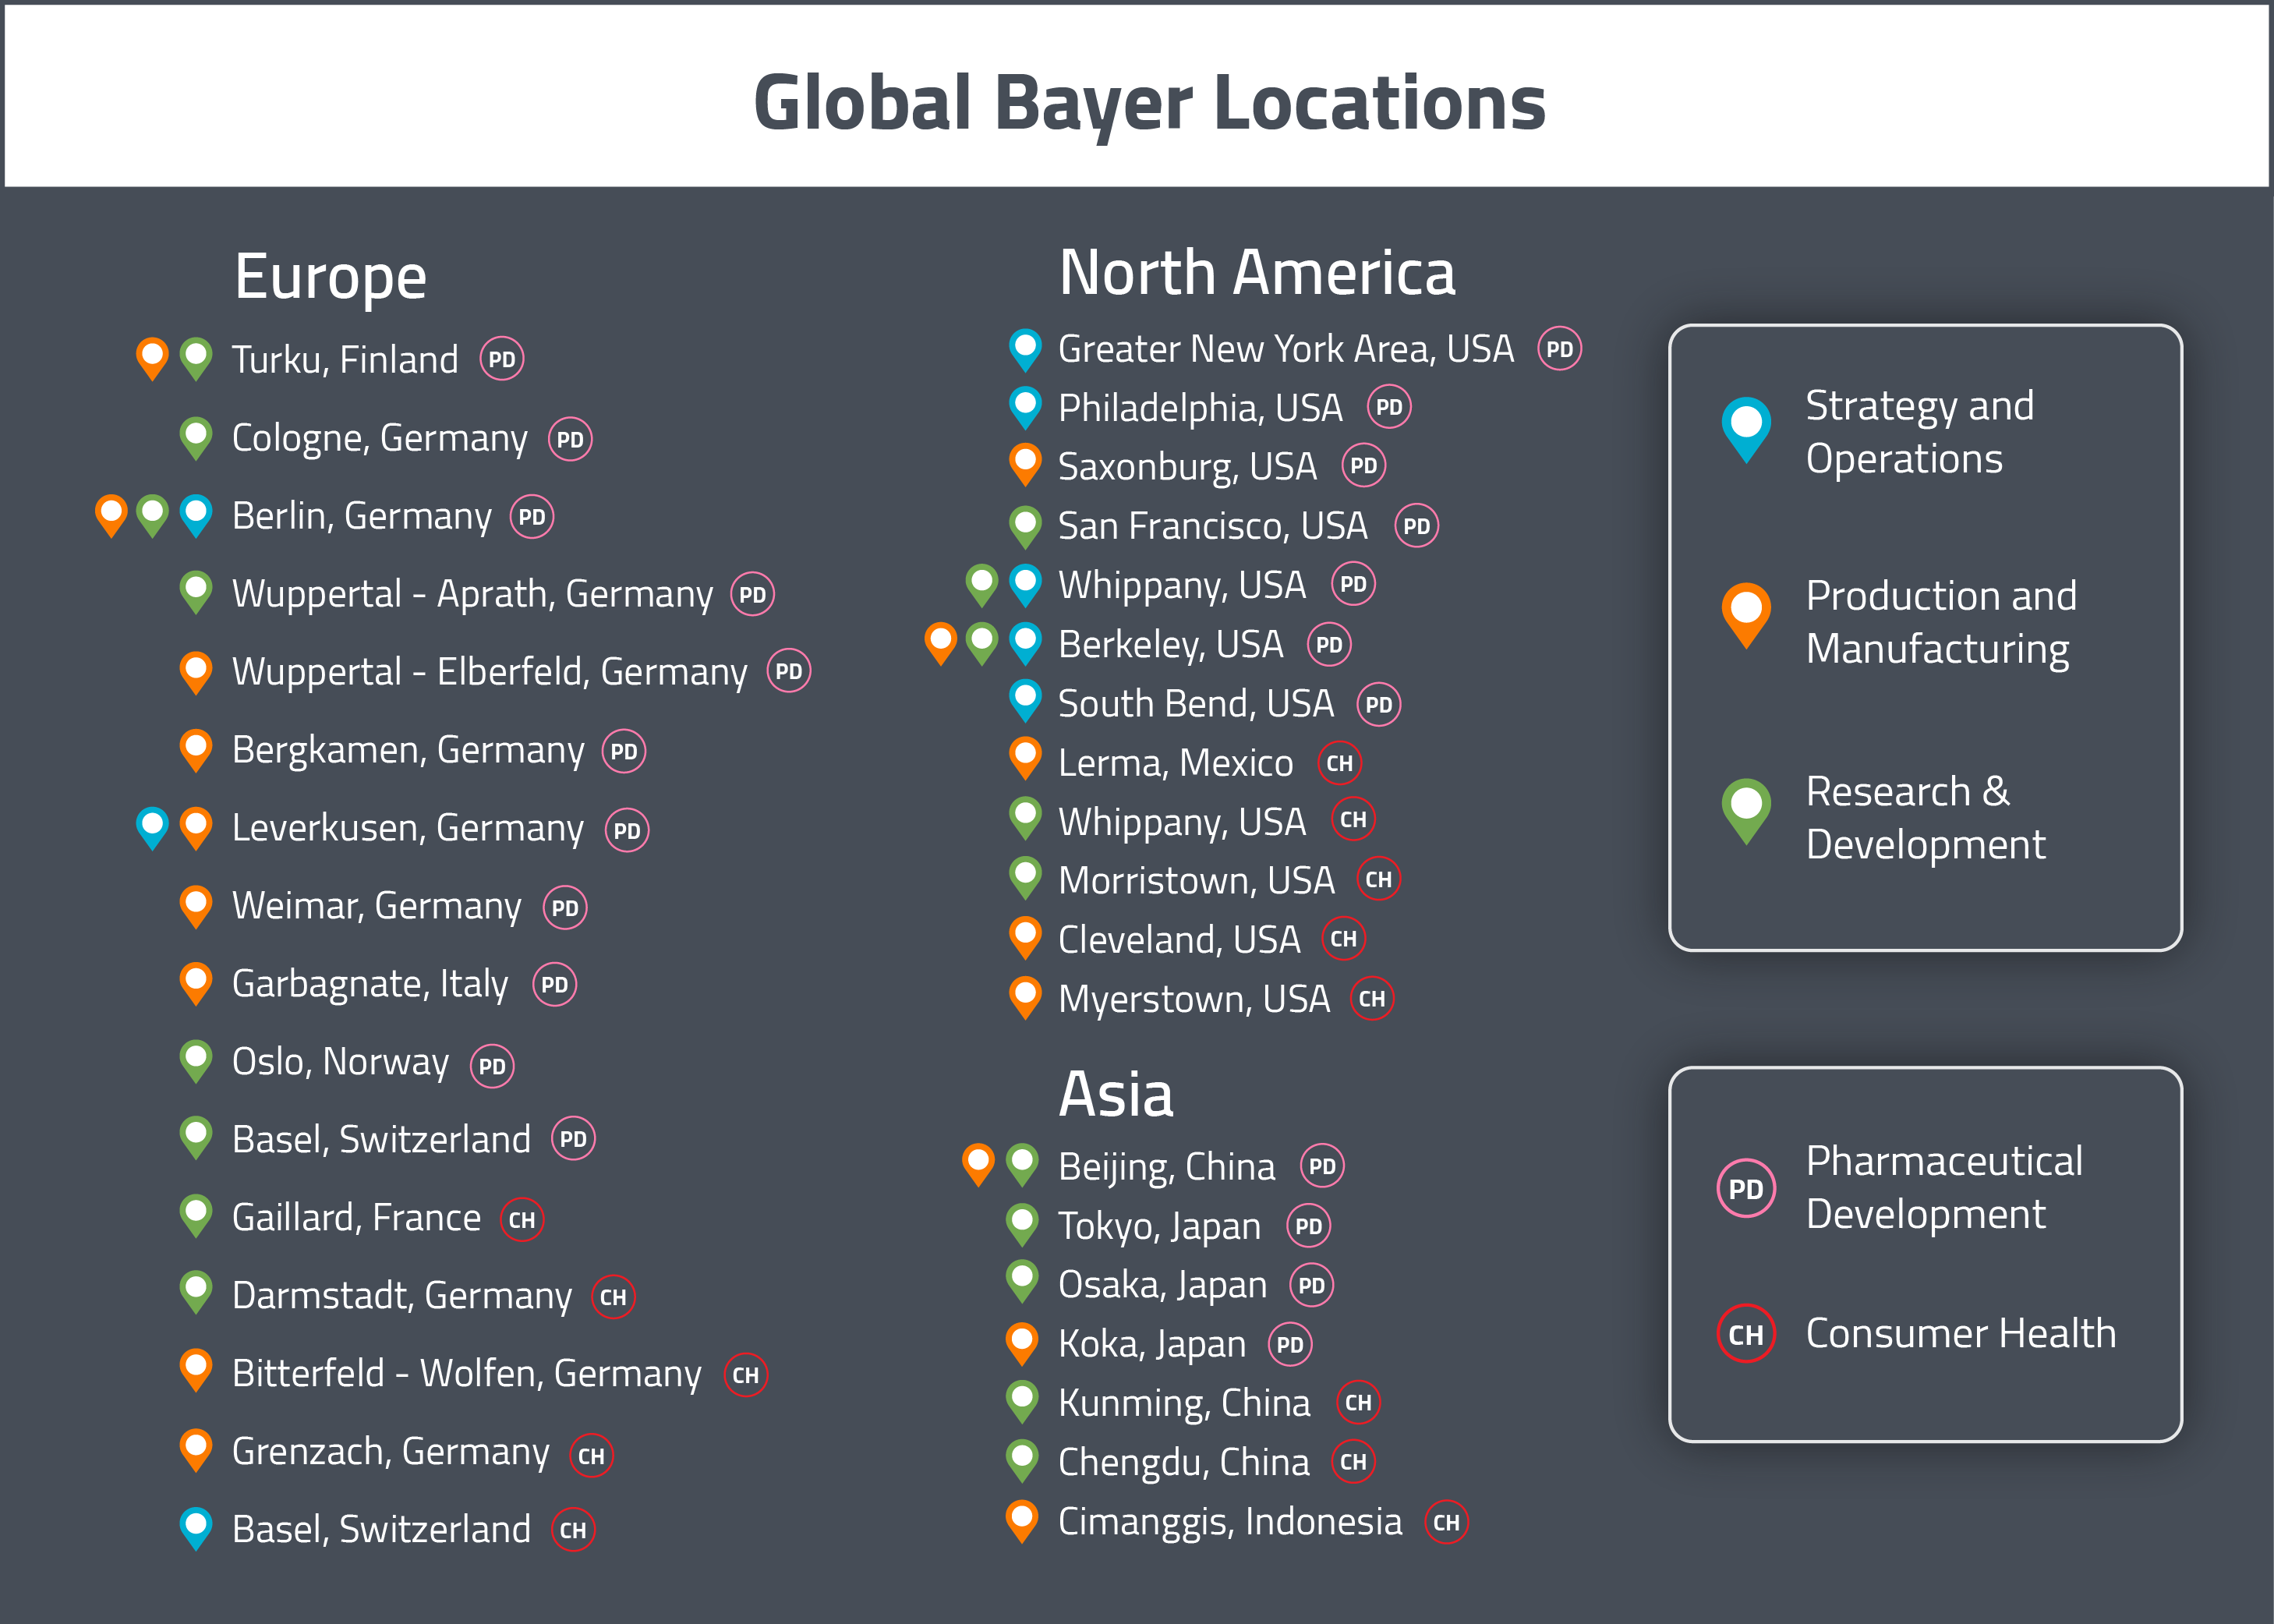 A map of Bayer's Global Drug Development and Manufacturing locations 2